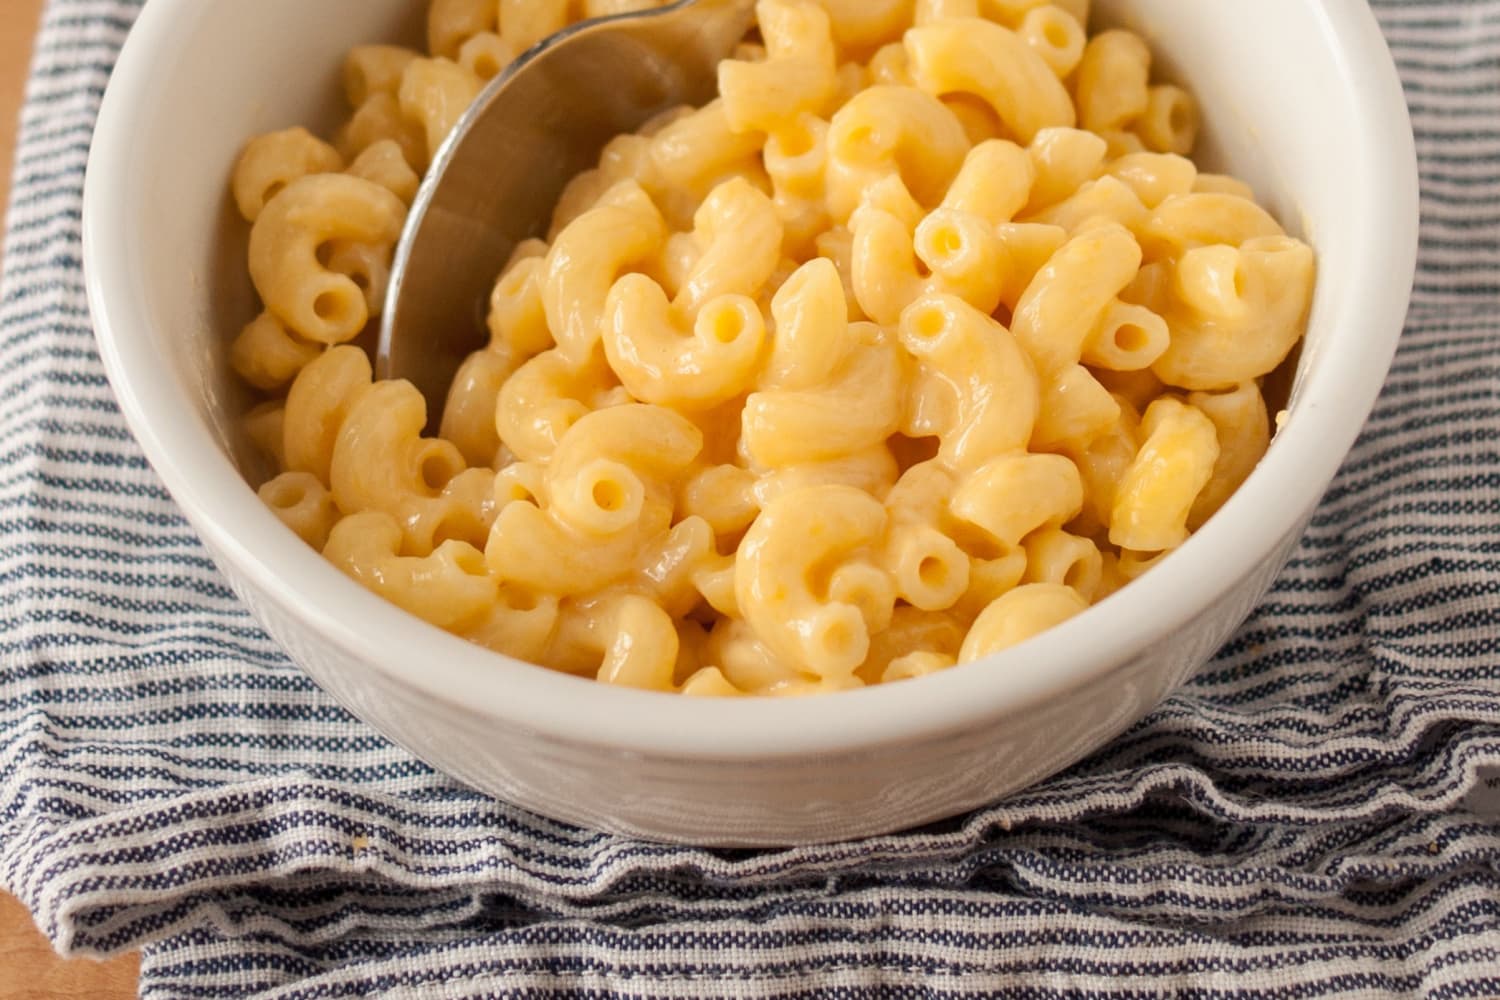 Microwave Mac and Cheese Recipe (Cheesy Goodness) | The Kitchn